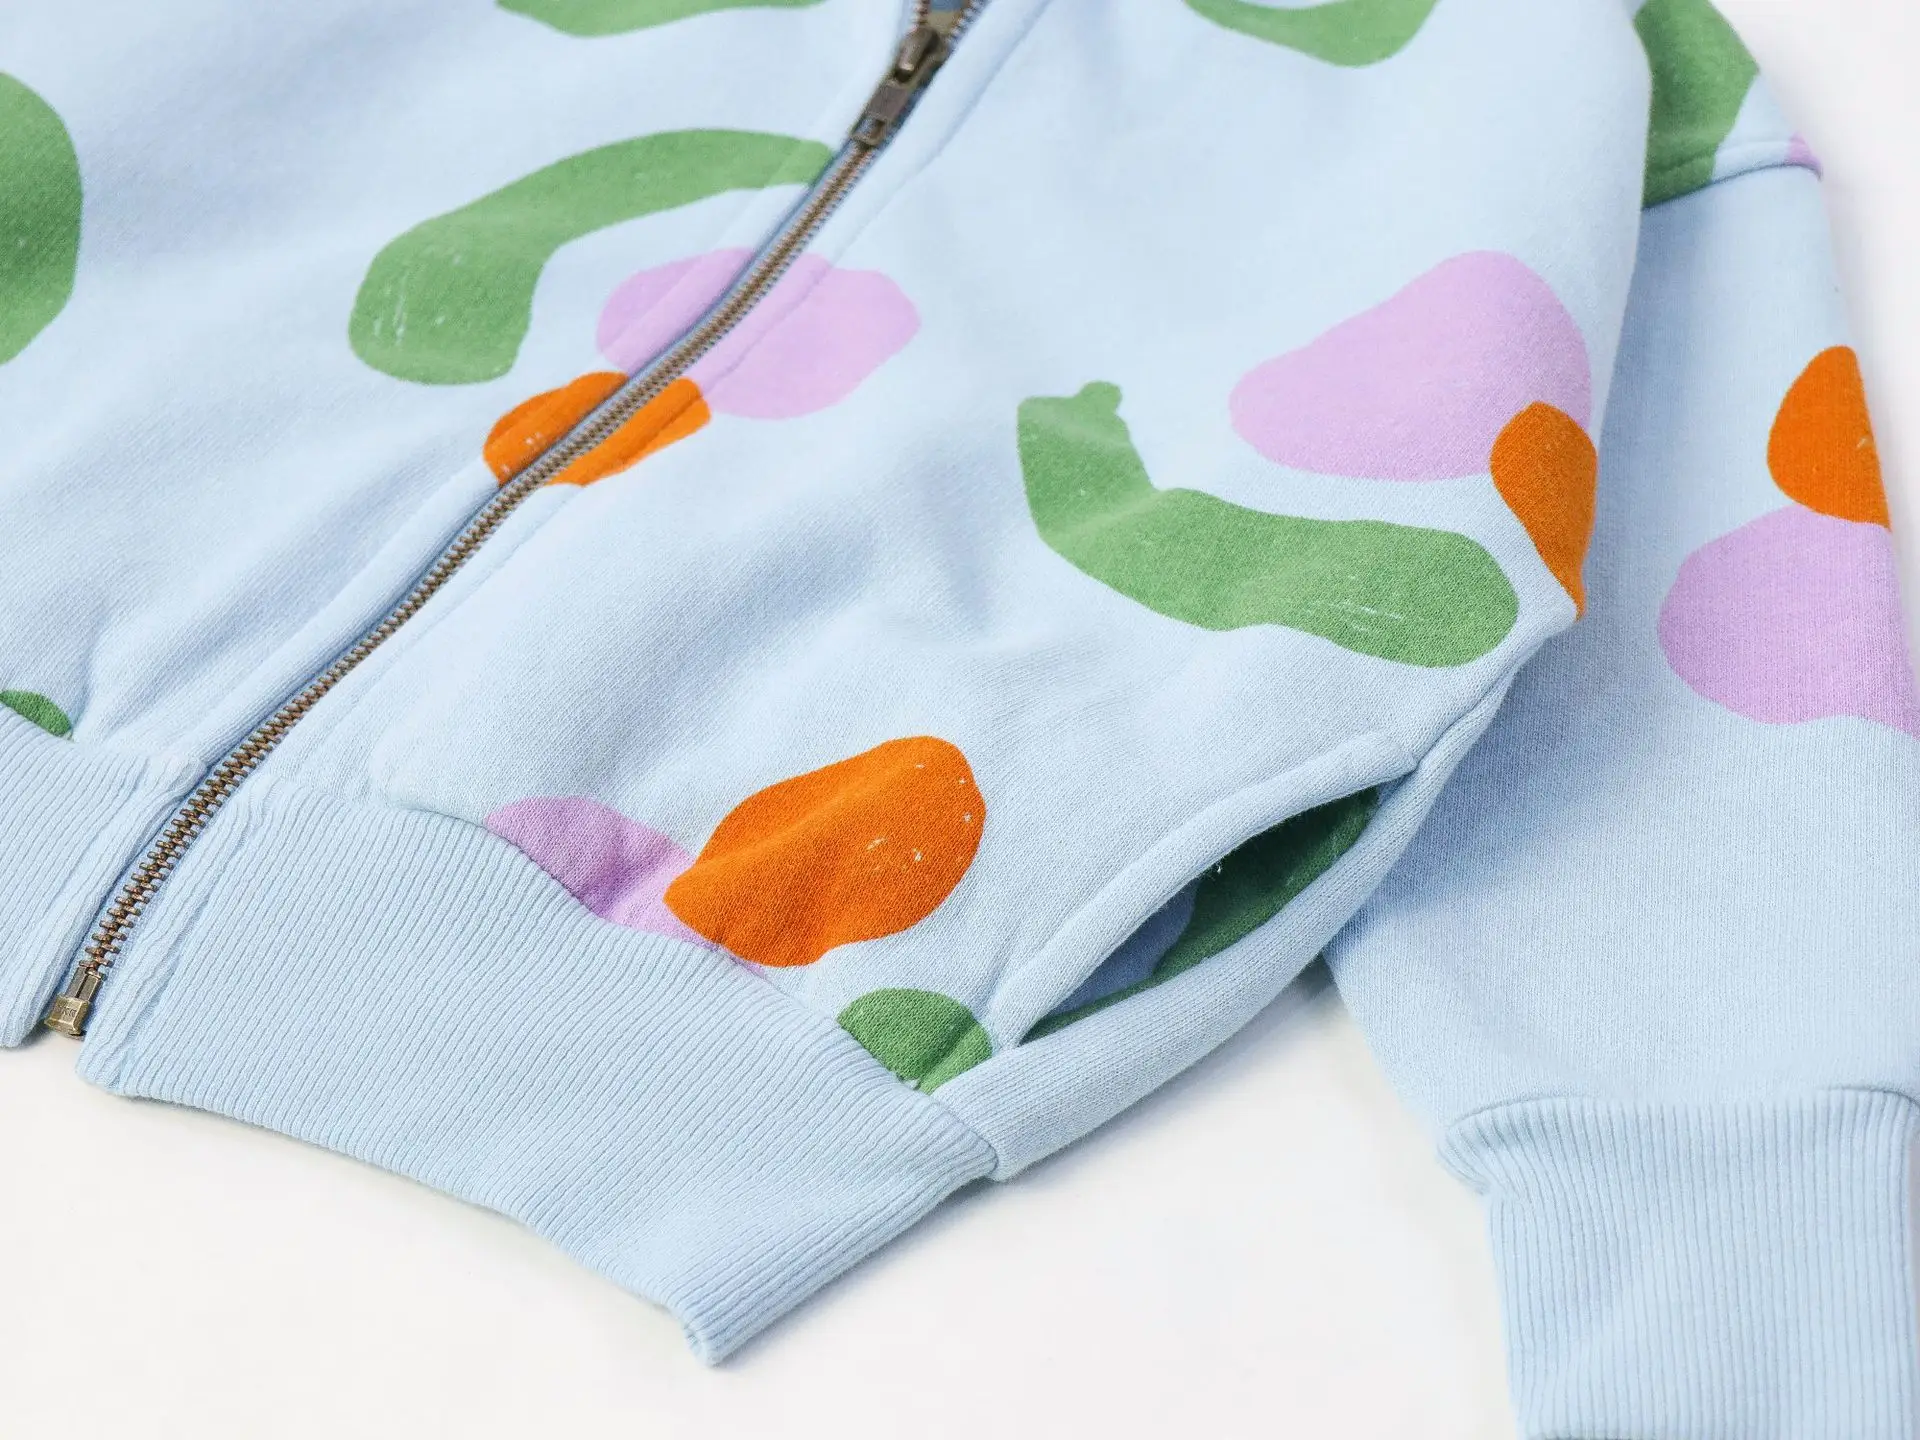 hoodie for girl New Bobo 2021 Autumn And Winter Kids Sweatshirts Cartoon Clothing Baby Boys Sweaters For Girls Long Sleeve Pullover Cute Tops children's anime hoodie